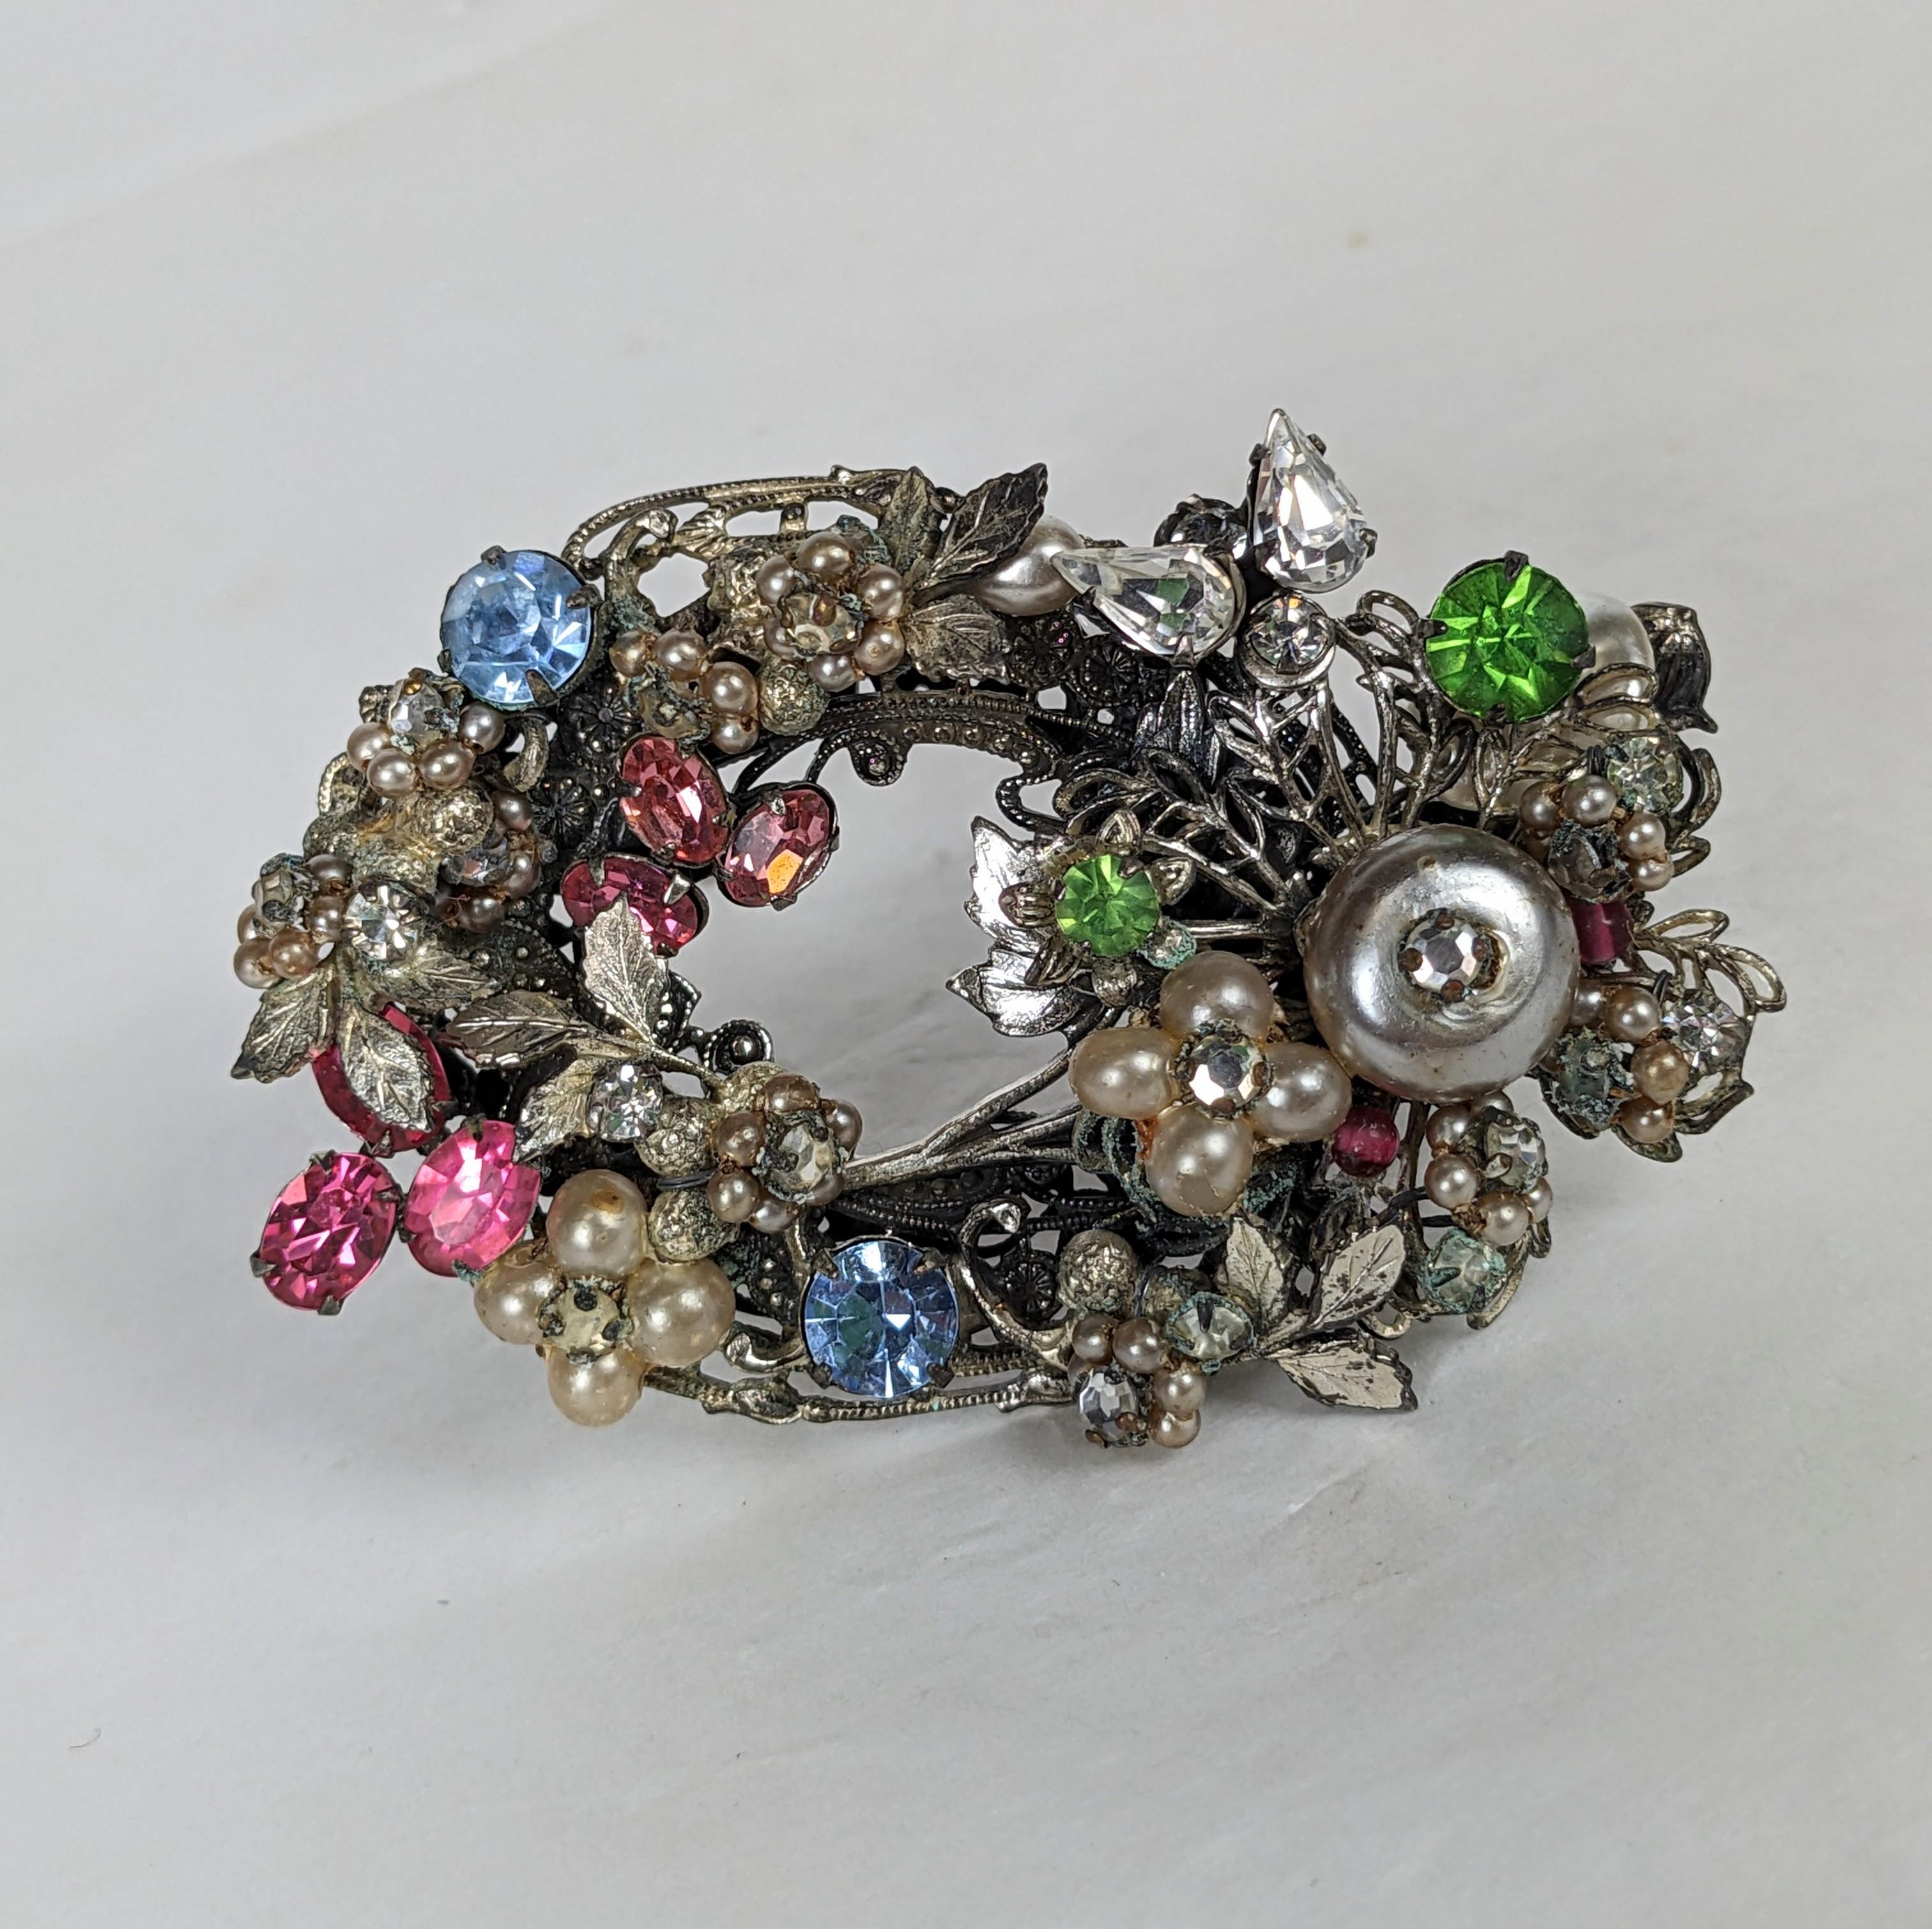 Miriam Haskell Multi Crystal and Faux Pearl Brooch from the 1940's. Silvertone filigree hand embroidered brooch with multicolored crystals and faux pearls. 1940's USA. Unsigned early piece. 2.35